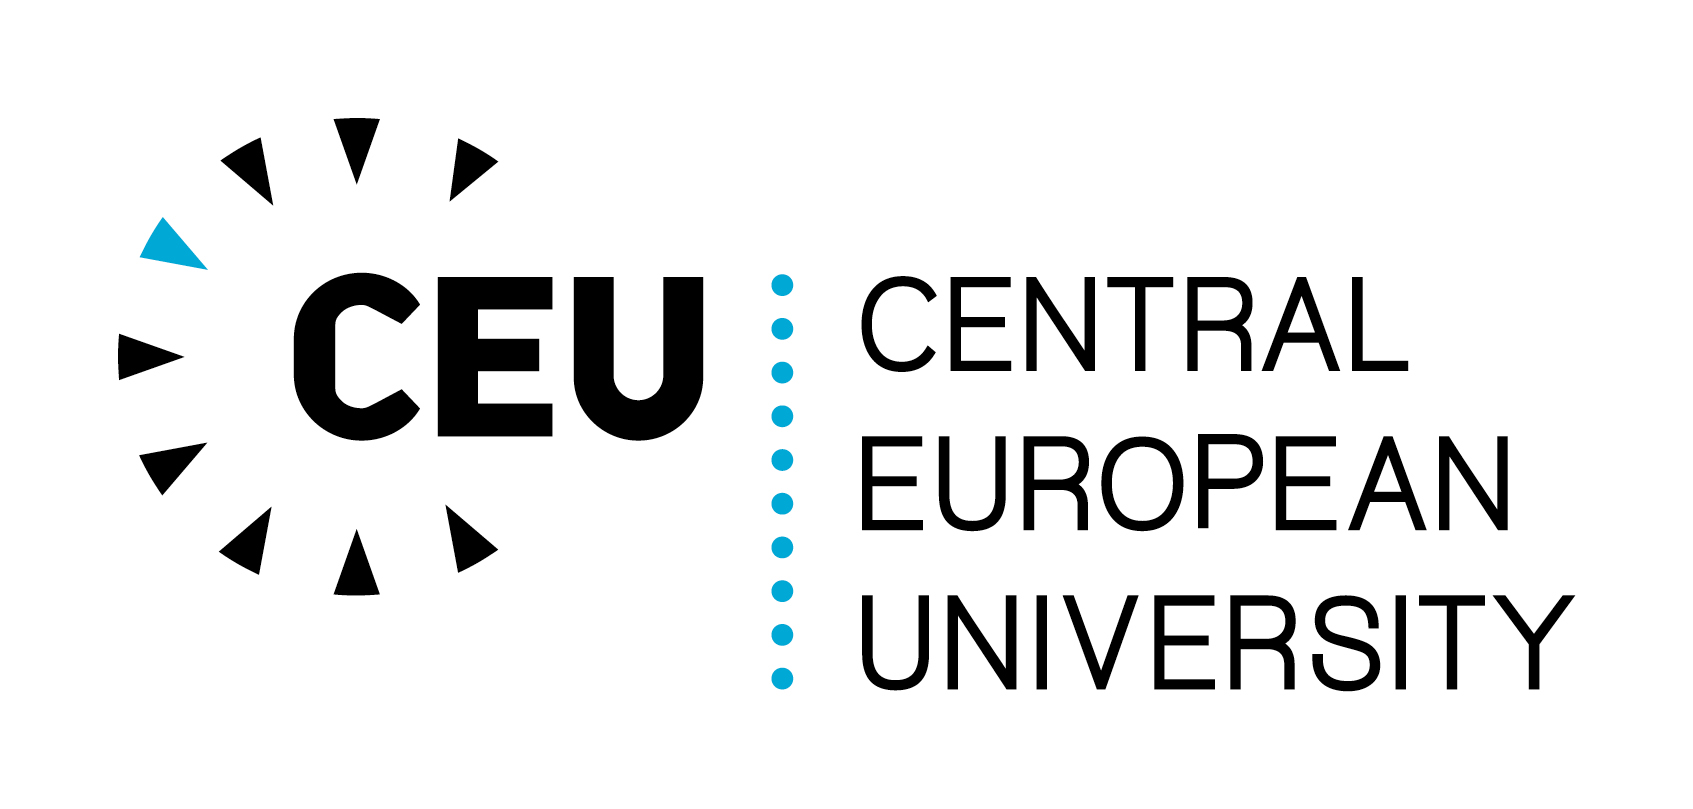 16-astonishing-facts-about-central-european-university